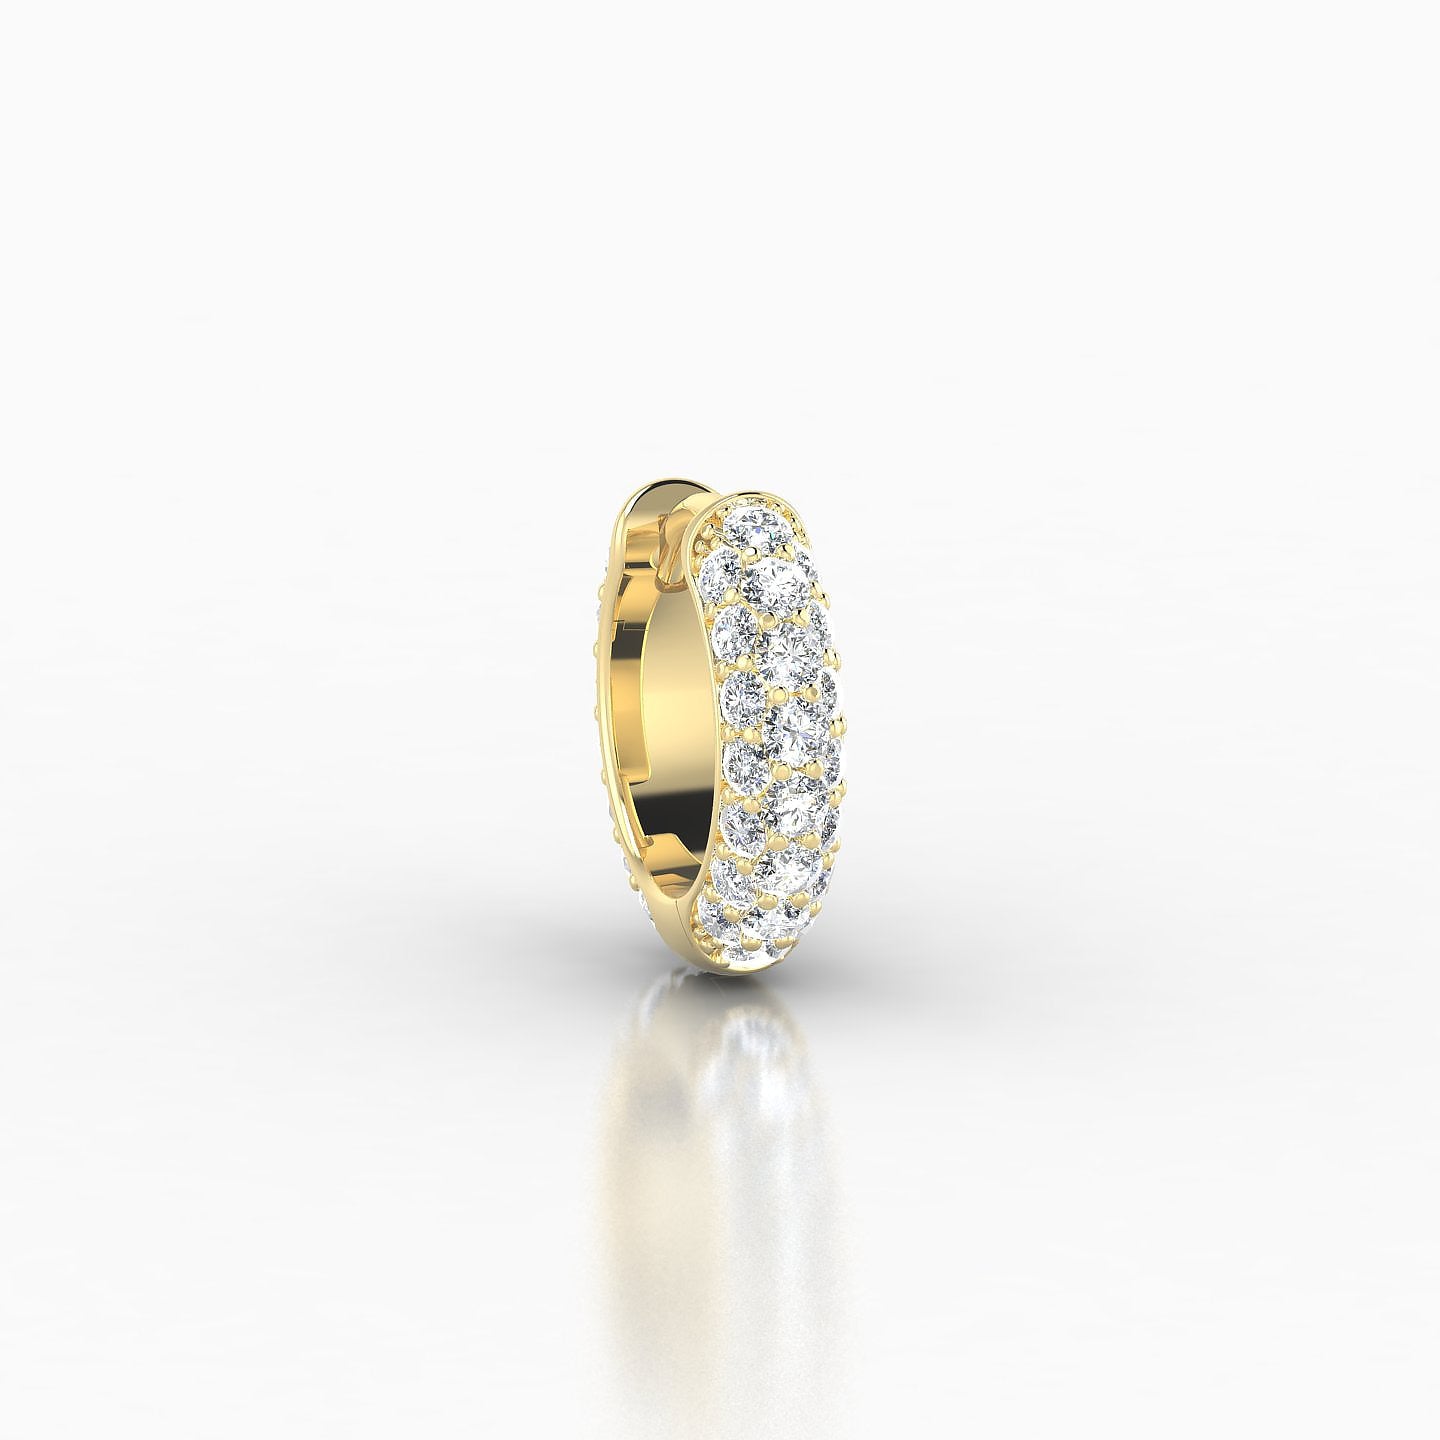 Theia | 18k Yellow Gold 6.5 mm Pave Diamond Nose Ring Piercing